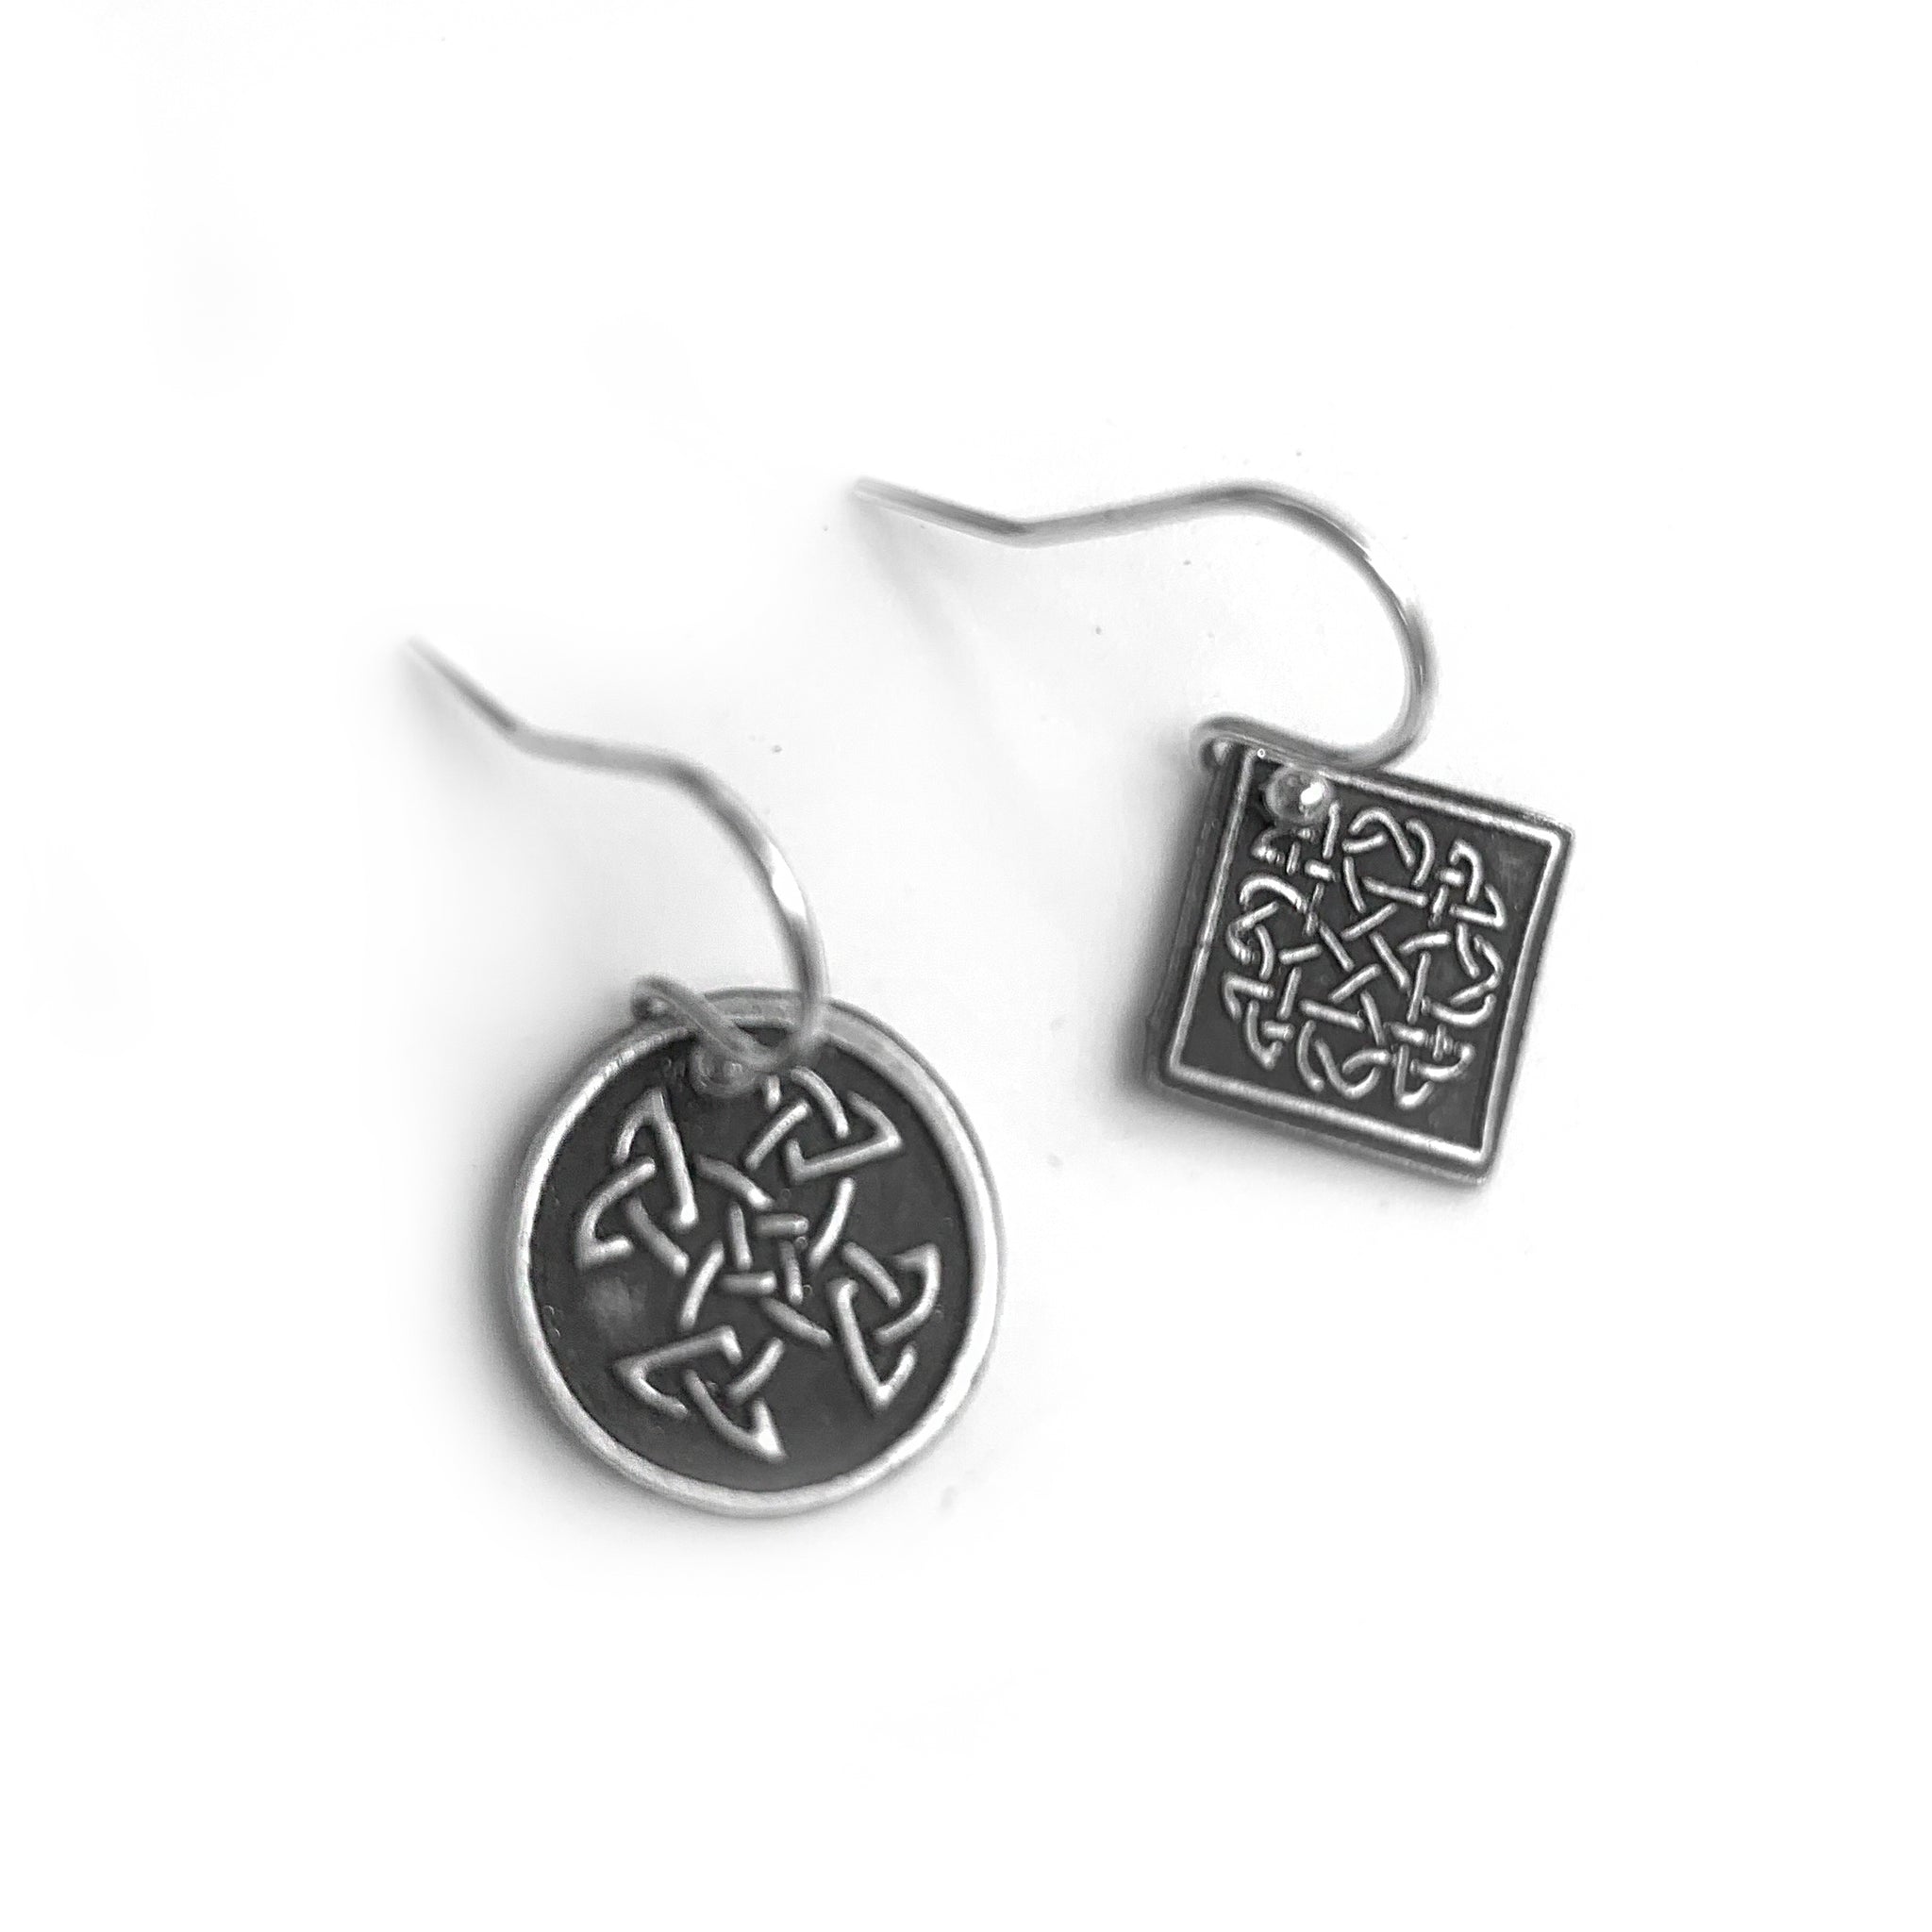 Mismatched Earrings with Celtic Knot Design